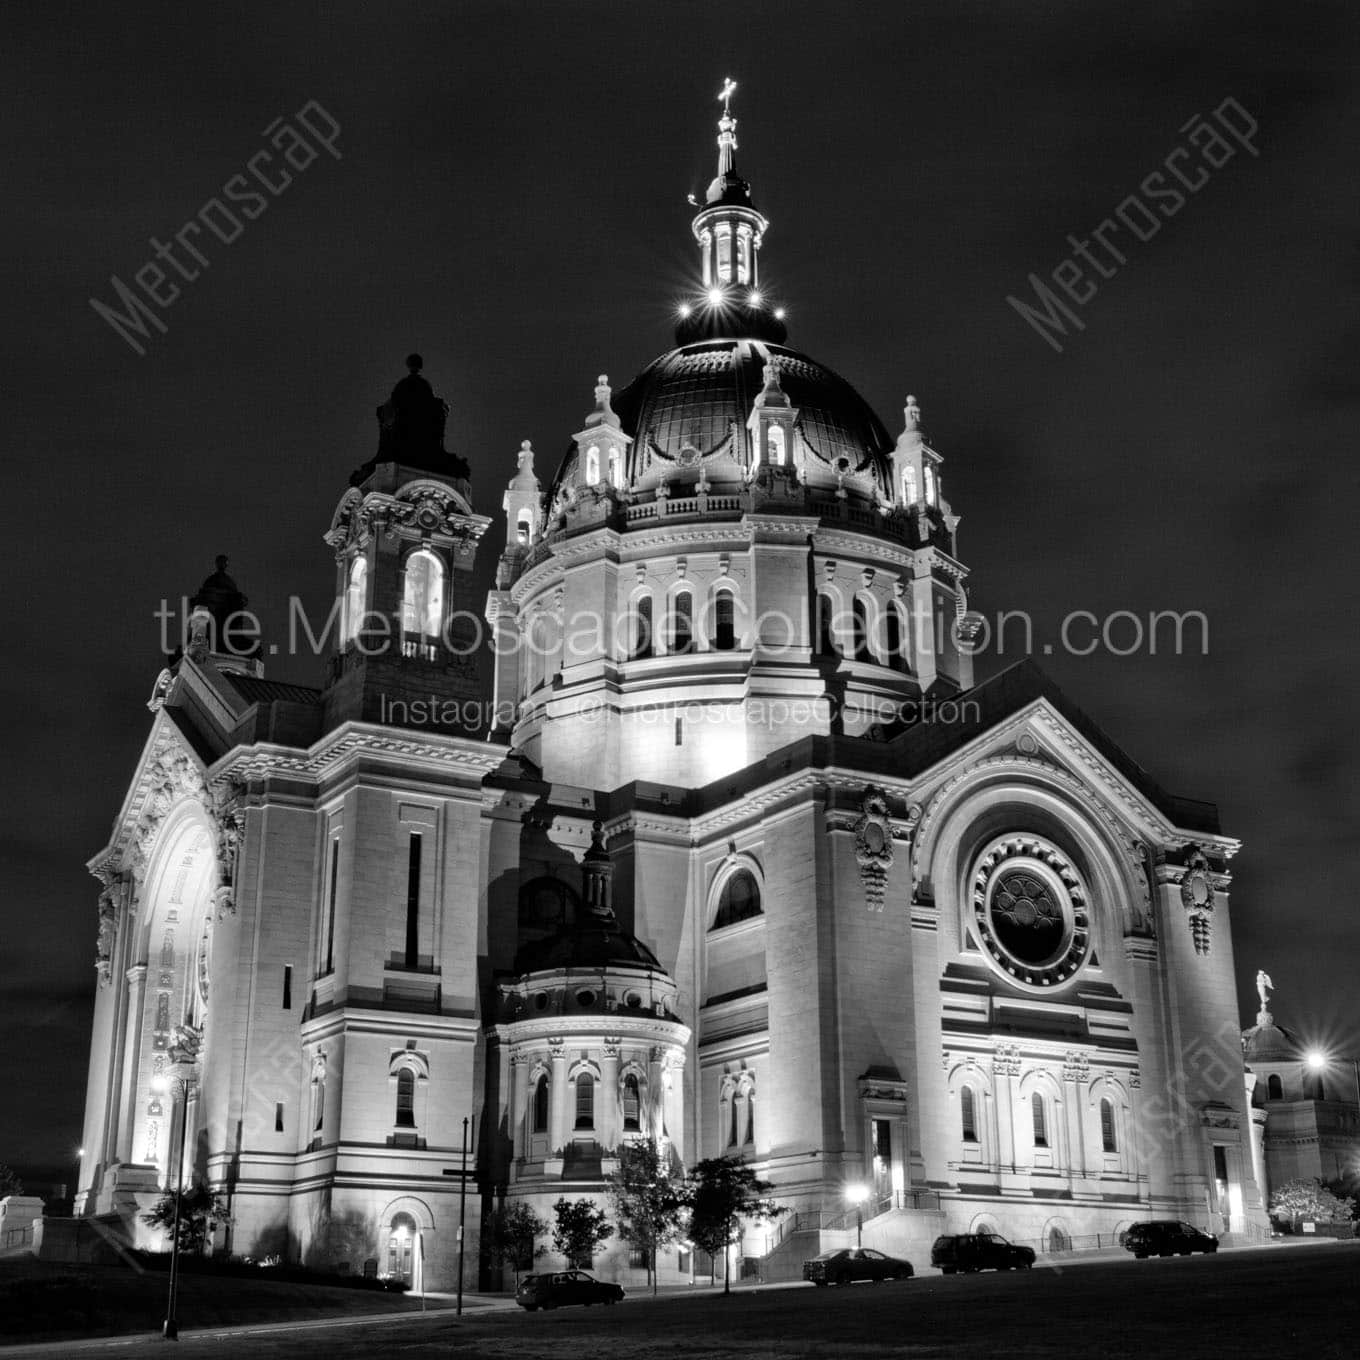 st paul cathedral at night Black & White Wall Art